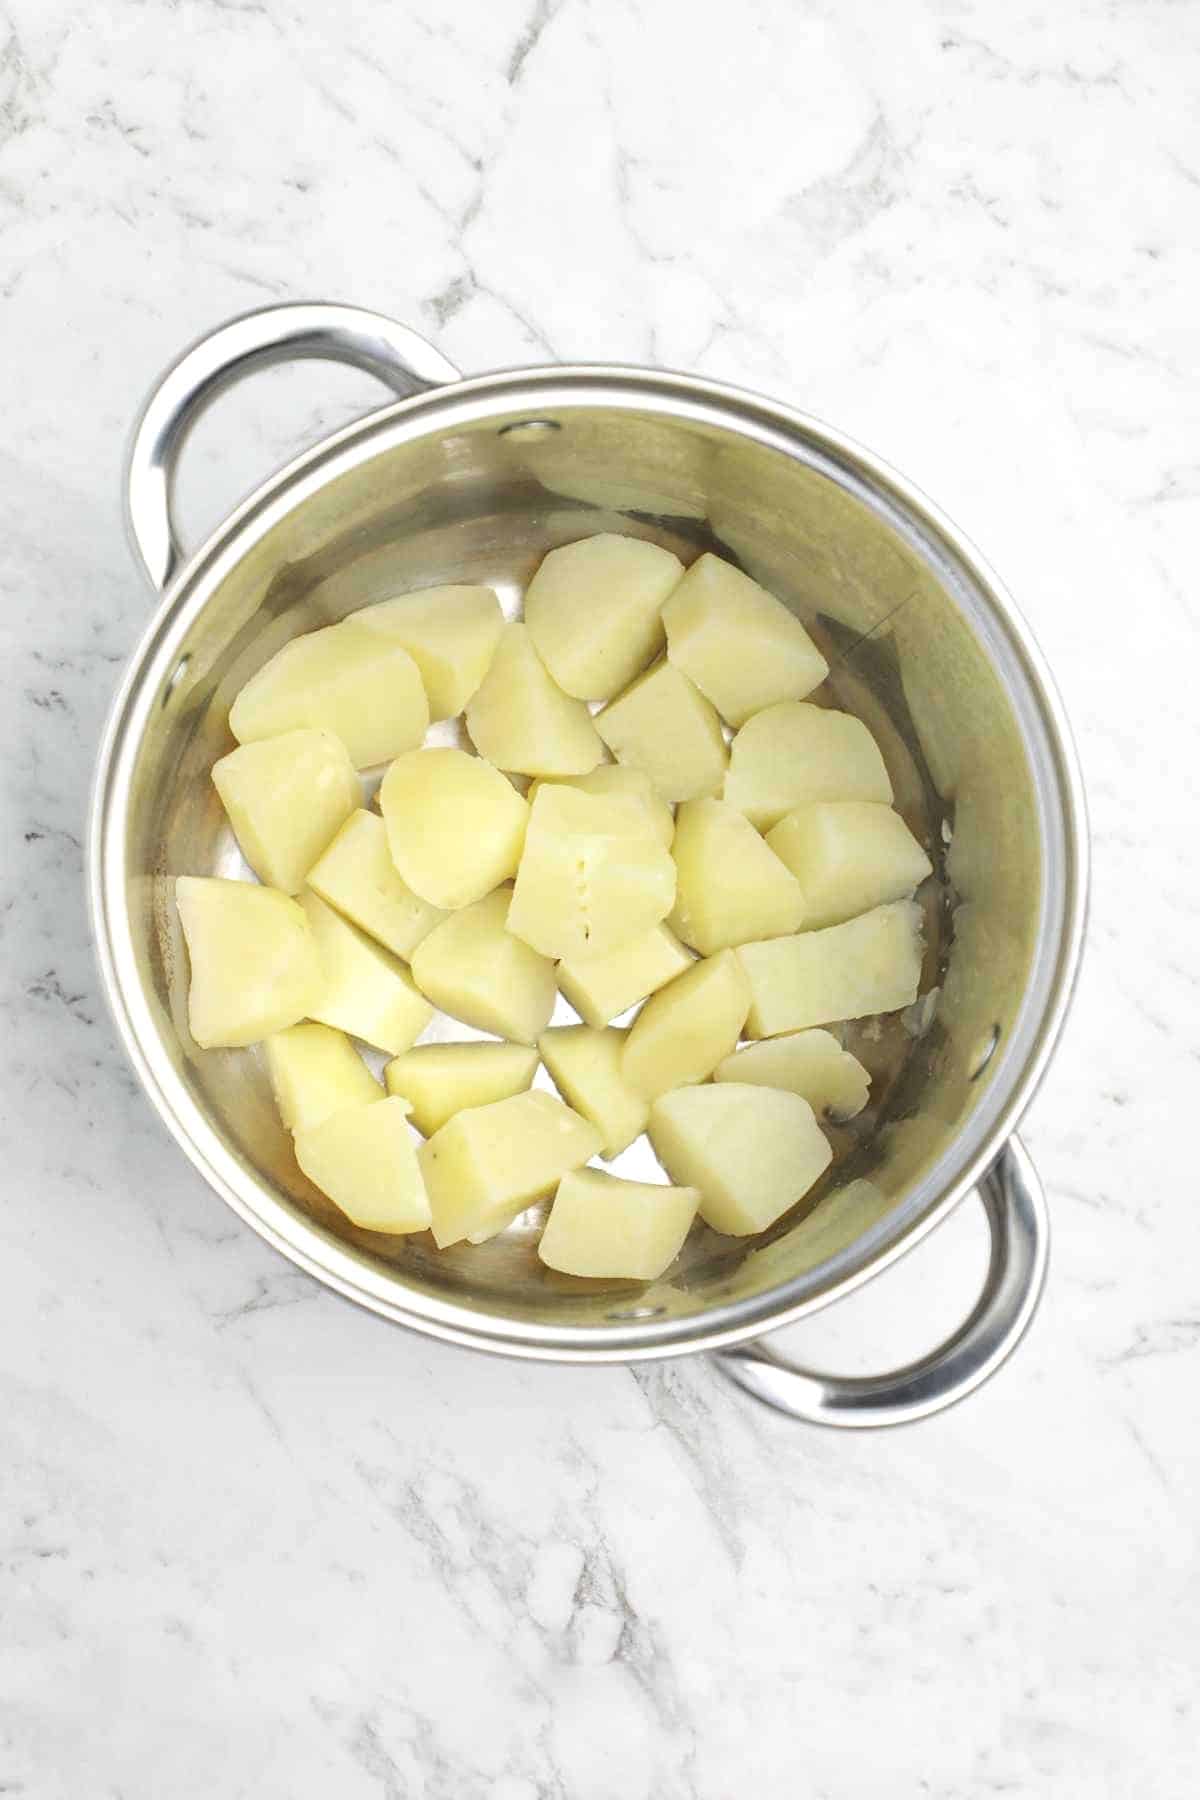 Put the potatoes in the pot to drain.